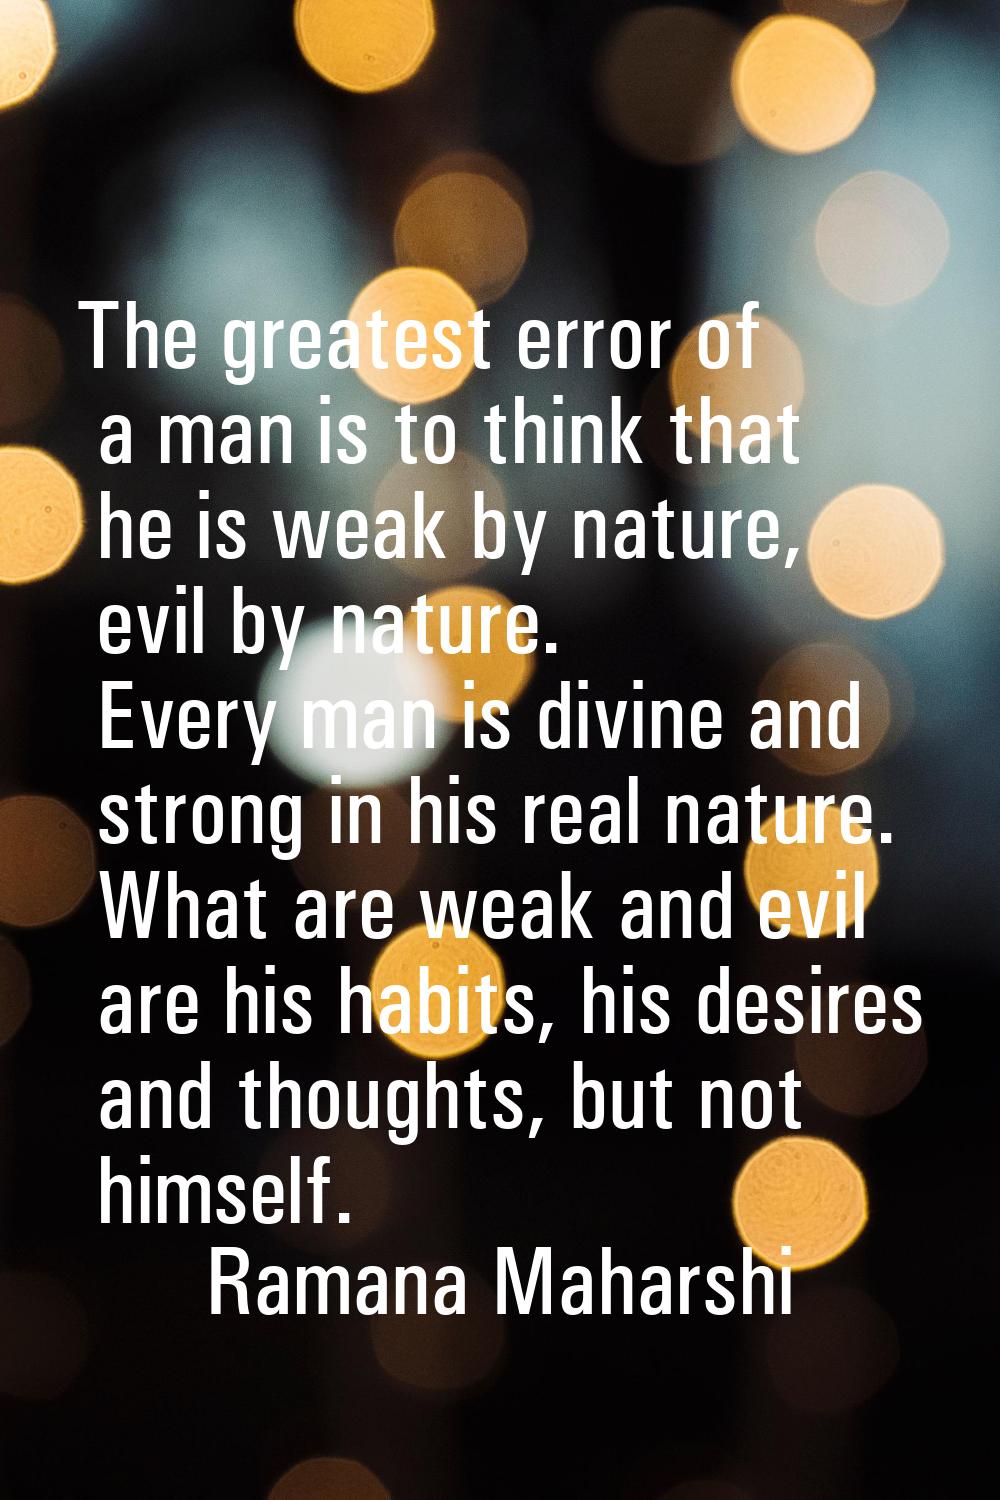 The greatest error of a man is to think that he is weak by nature, evil by nature. Every man is div